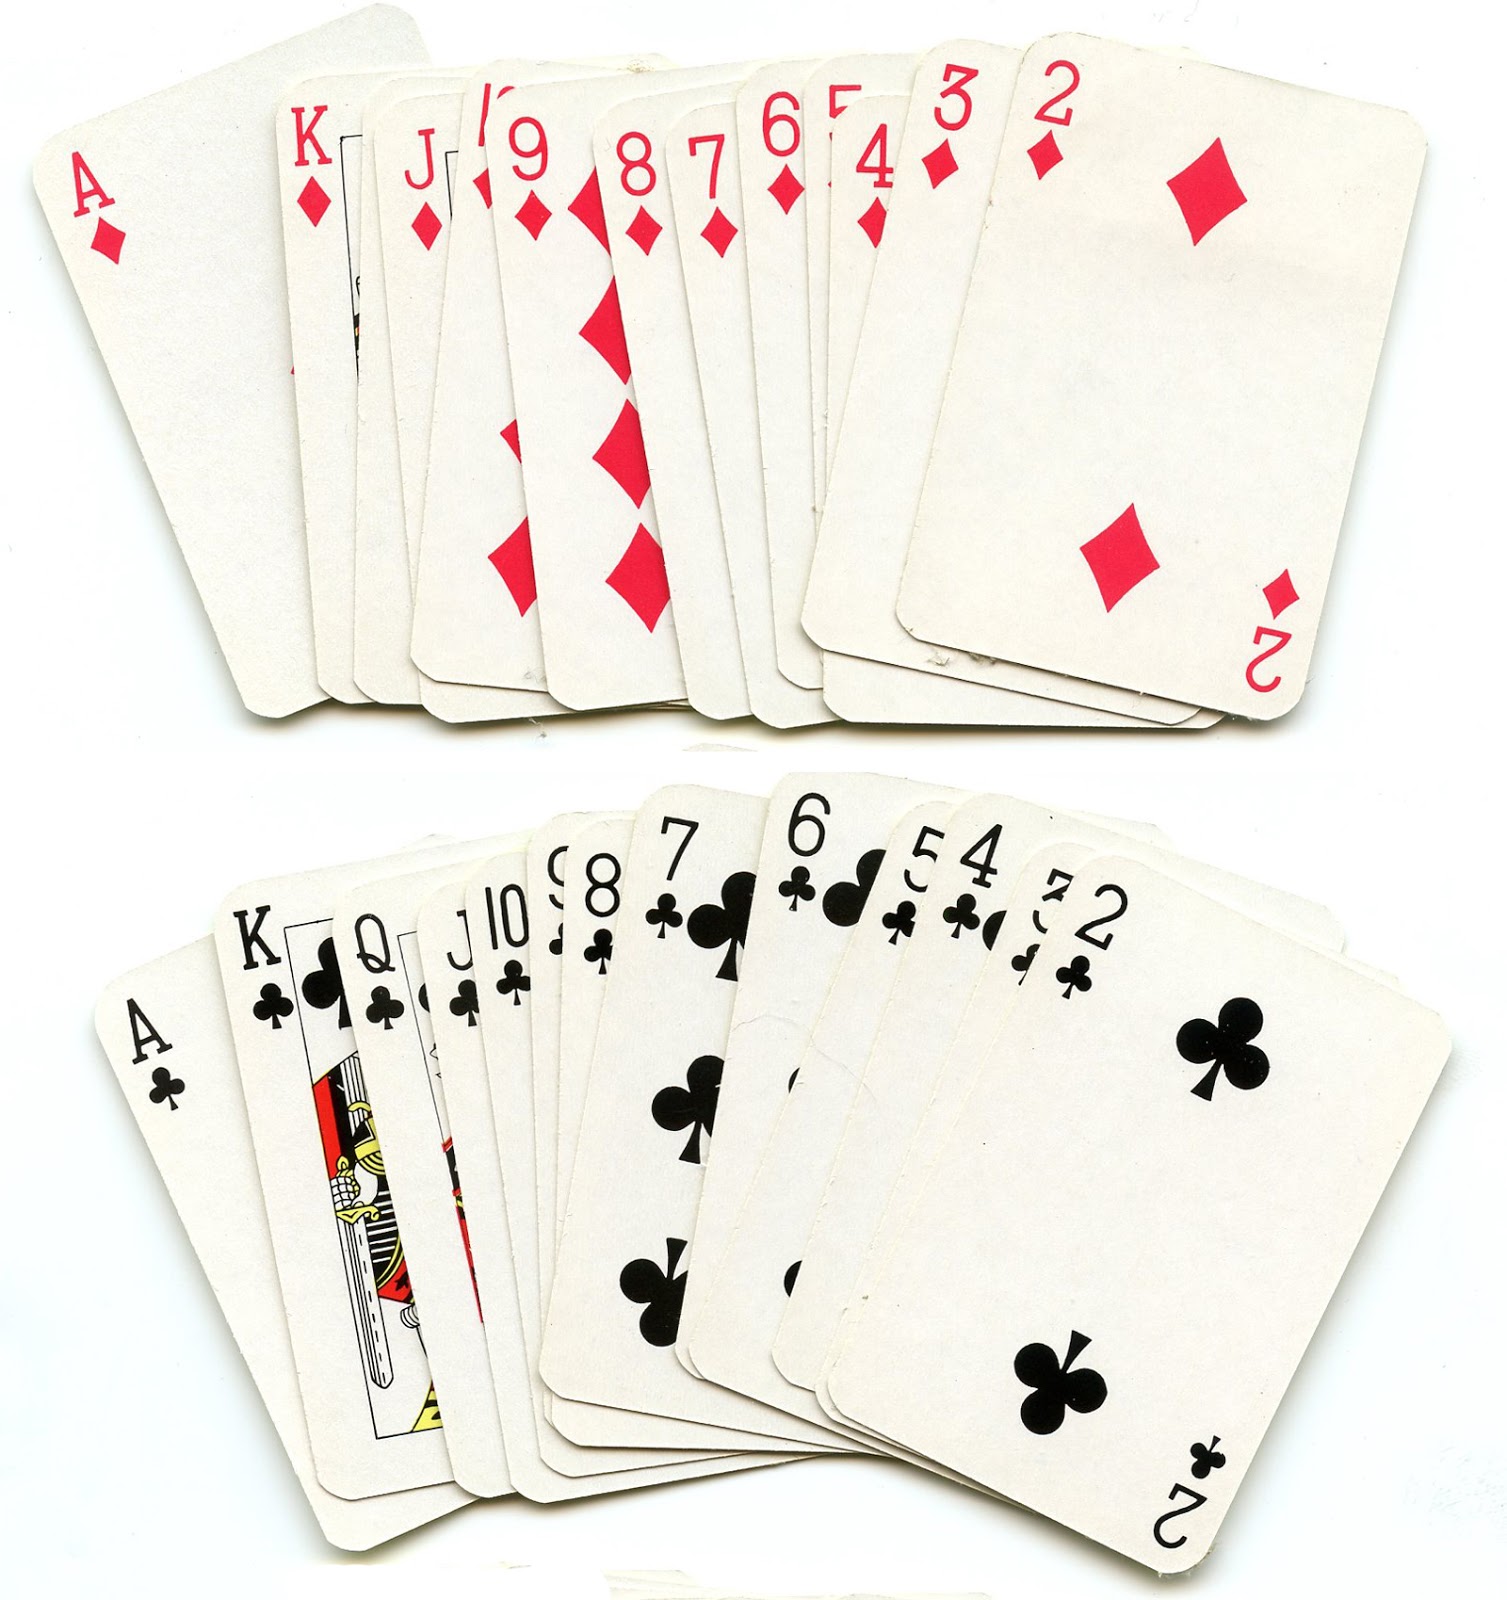 Filmic Light - Snow White Archive: 'Snow White on Ice' Playing Cards